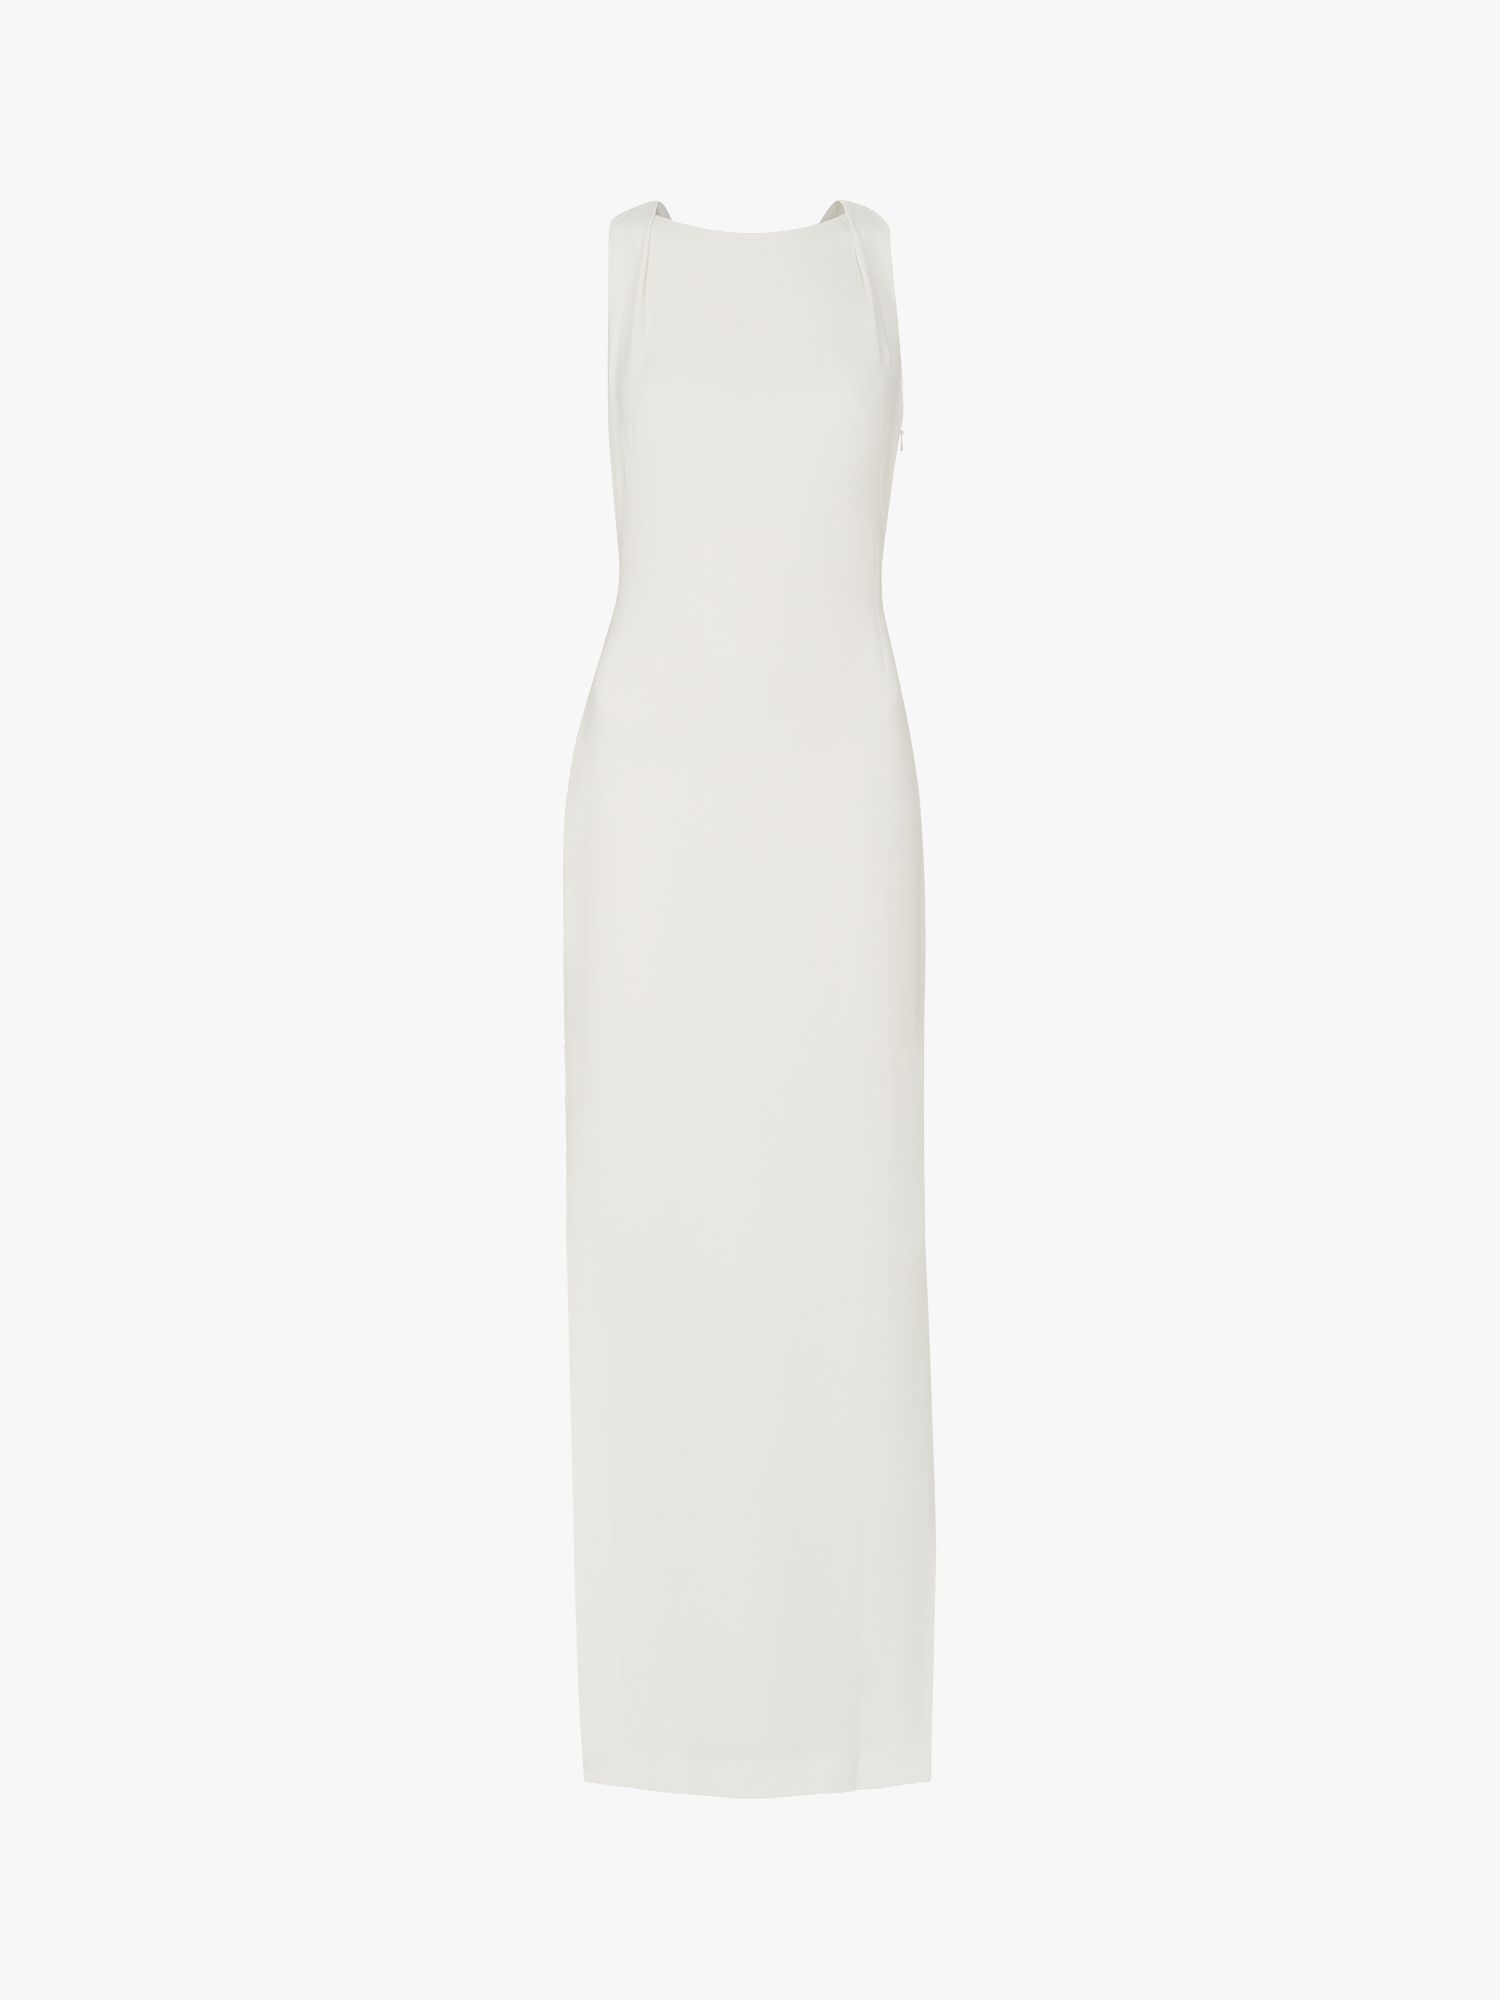 Whistles Tie Back Maxi Dress, Ivory, 6